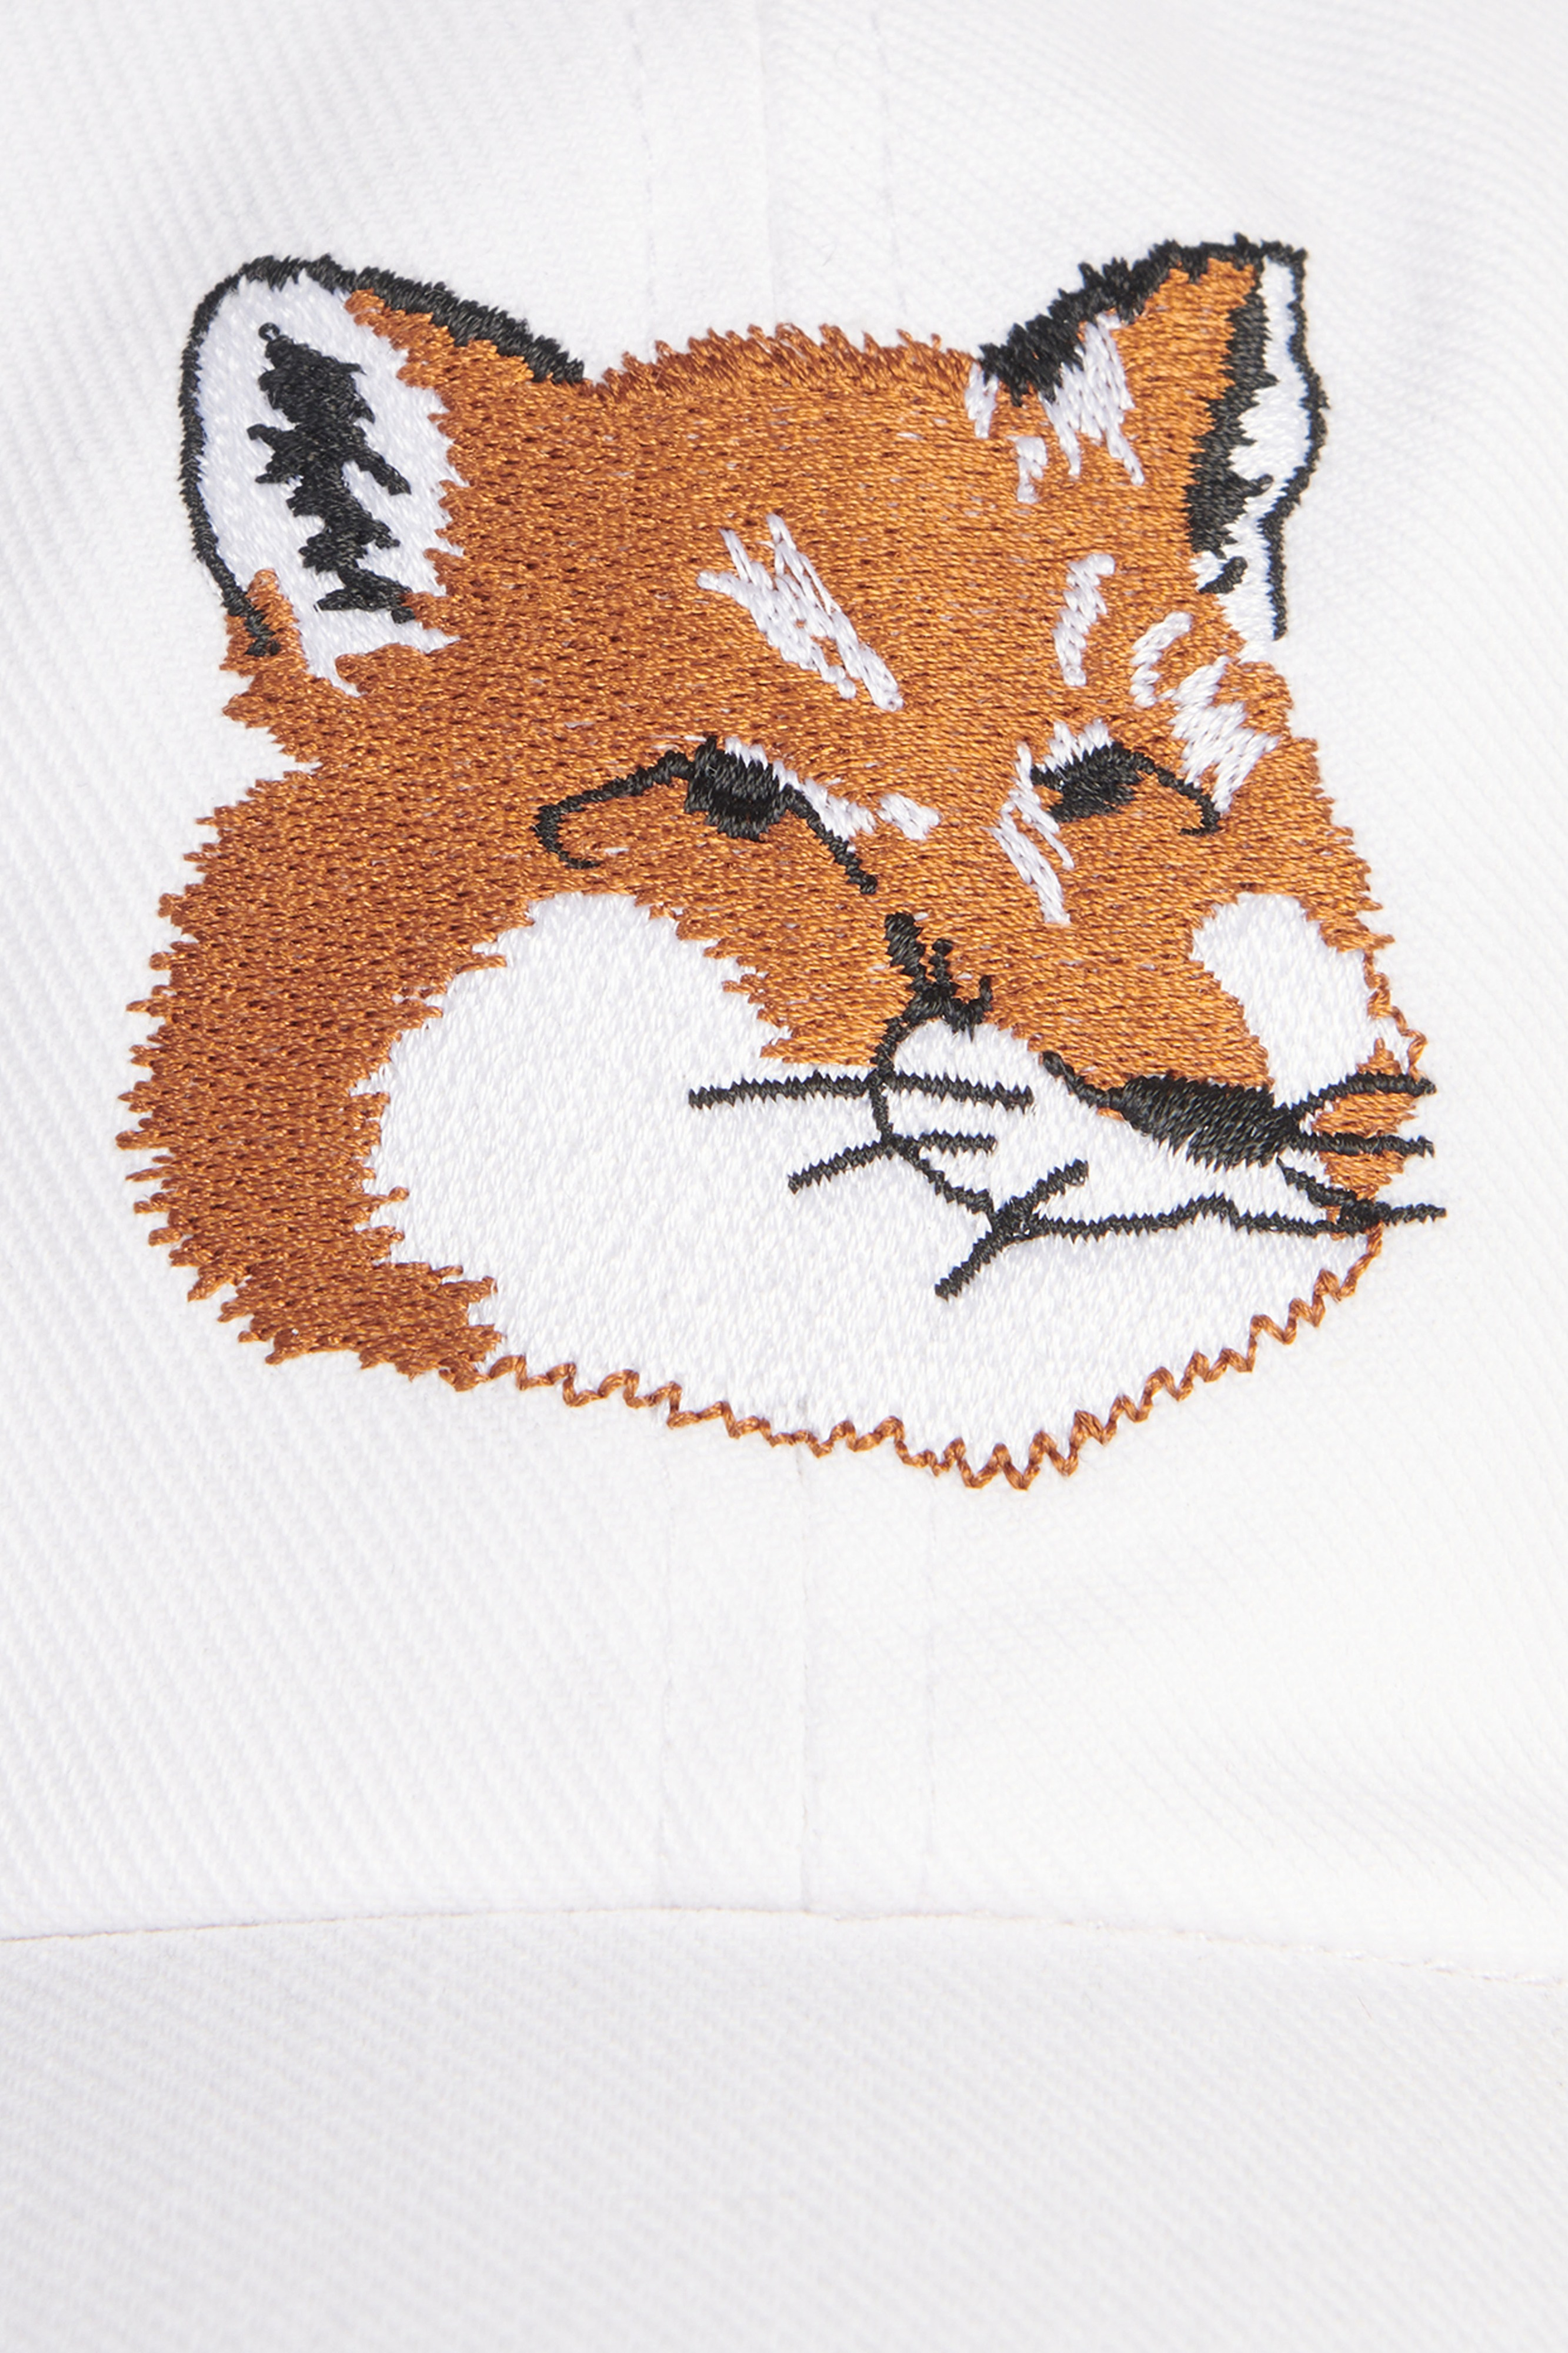 LARGE FOX HEAD EMBROIDERY 6P CAP